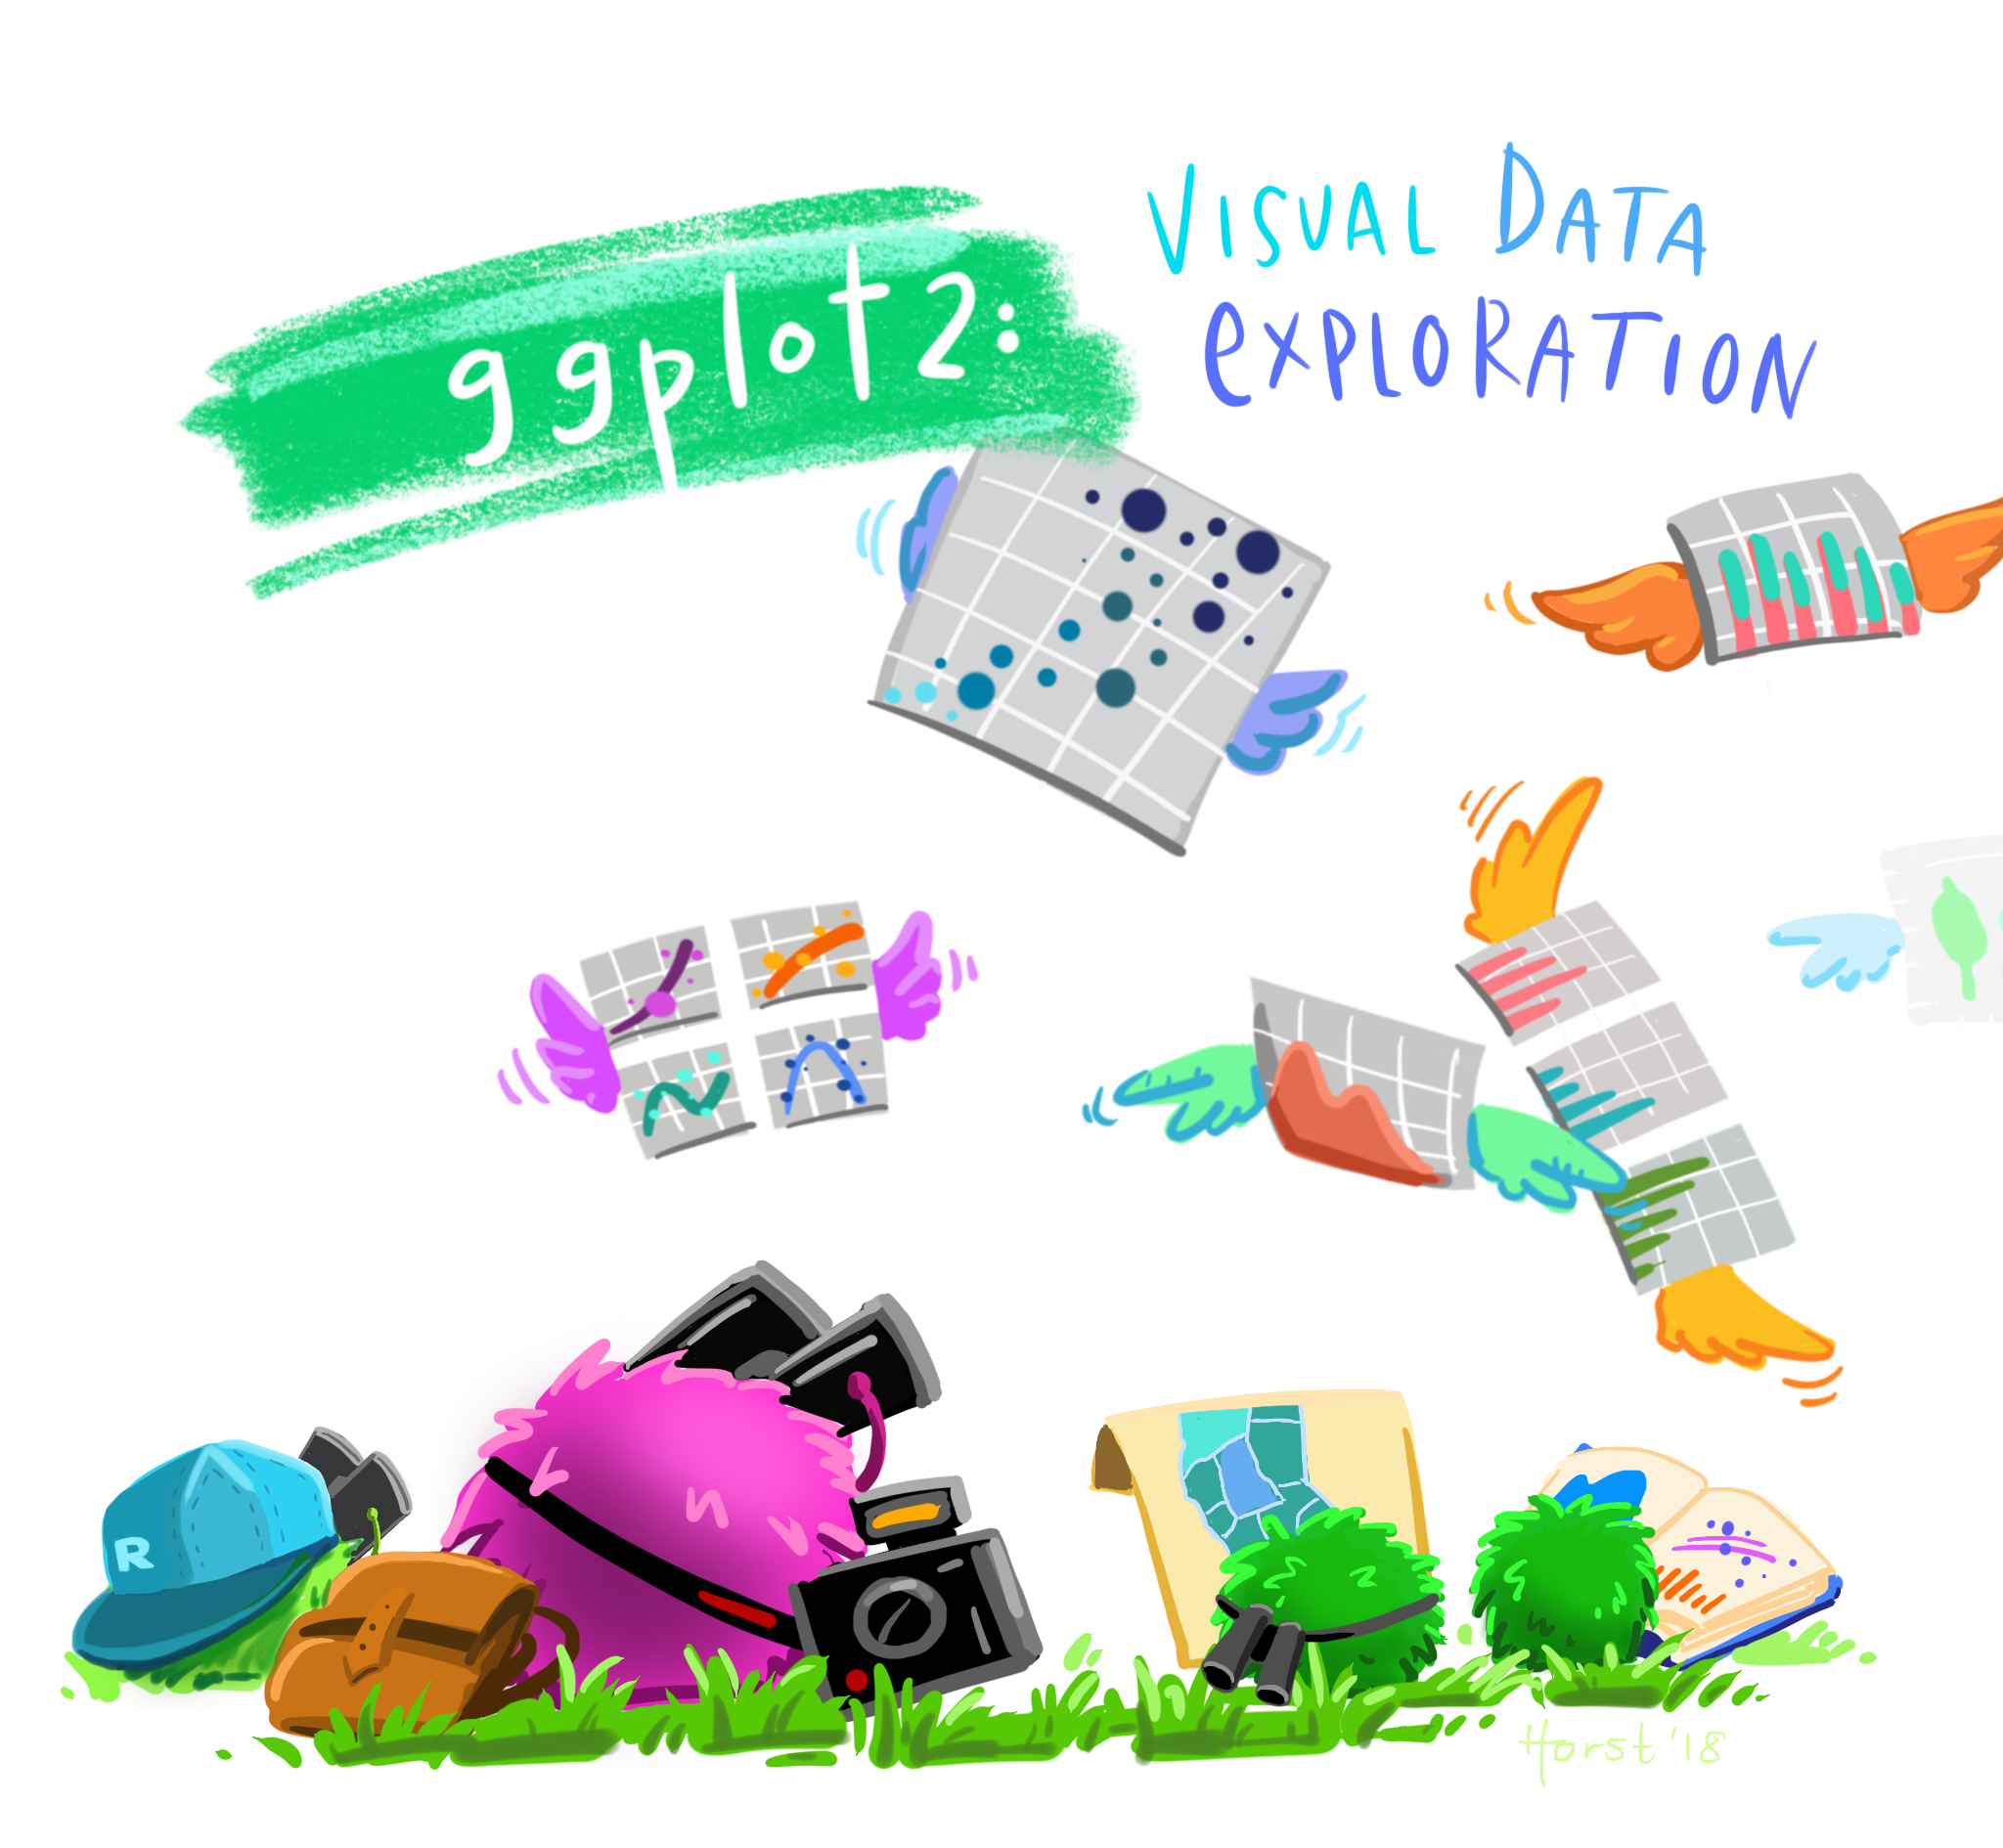 A group of fuzzy round monsters with binoculars, backpacks and guide books looking up a graphs flying around with wings (like birders, but with exploratory data visualizations). Stylized text reads “ggplot2: visual data exploration.”